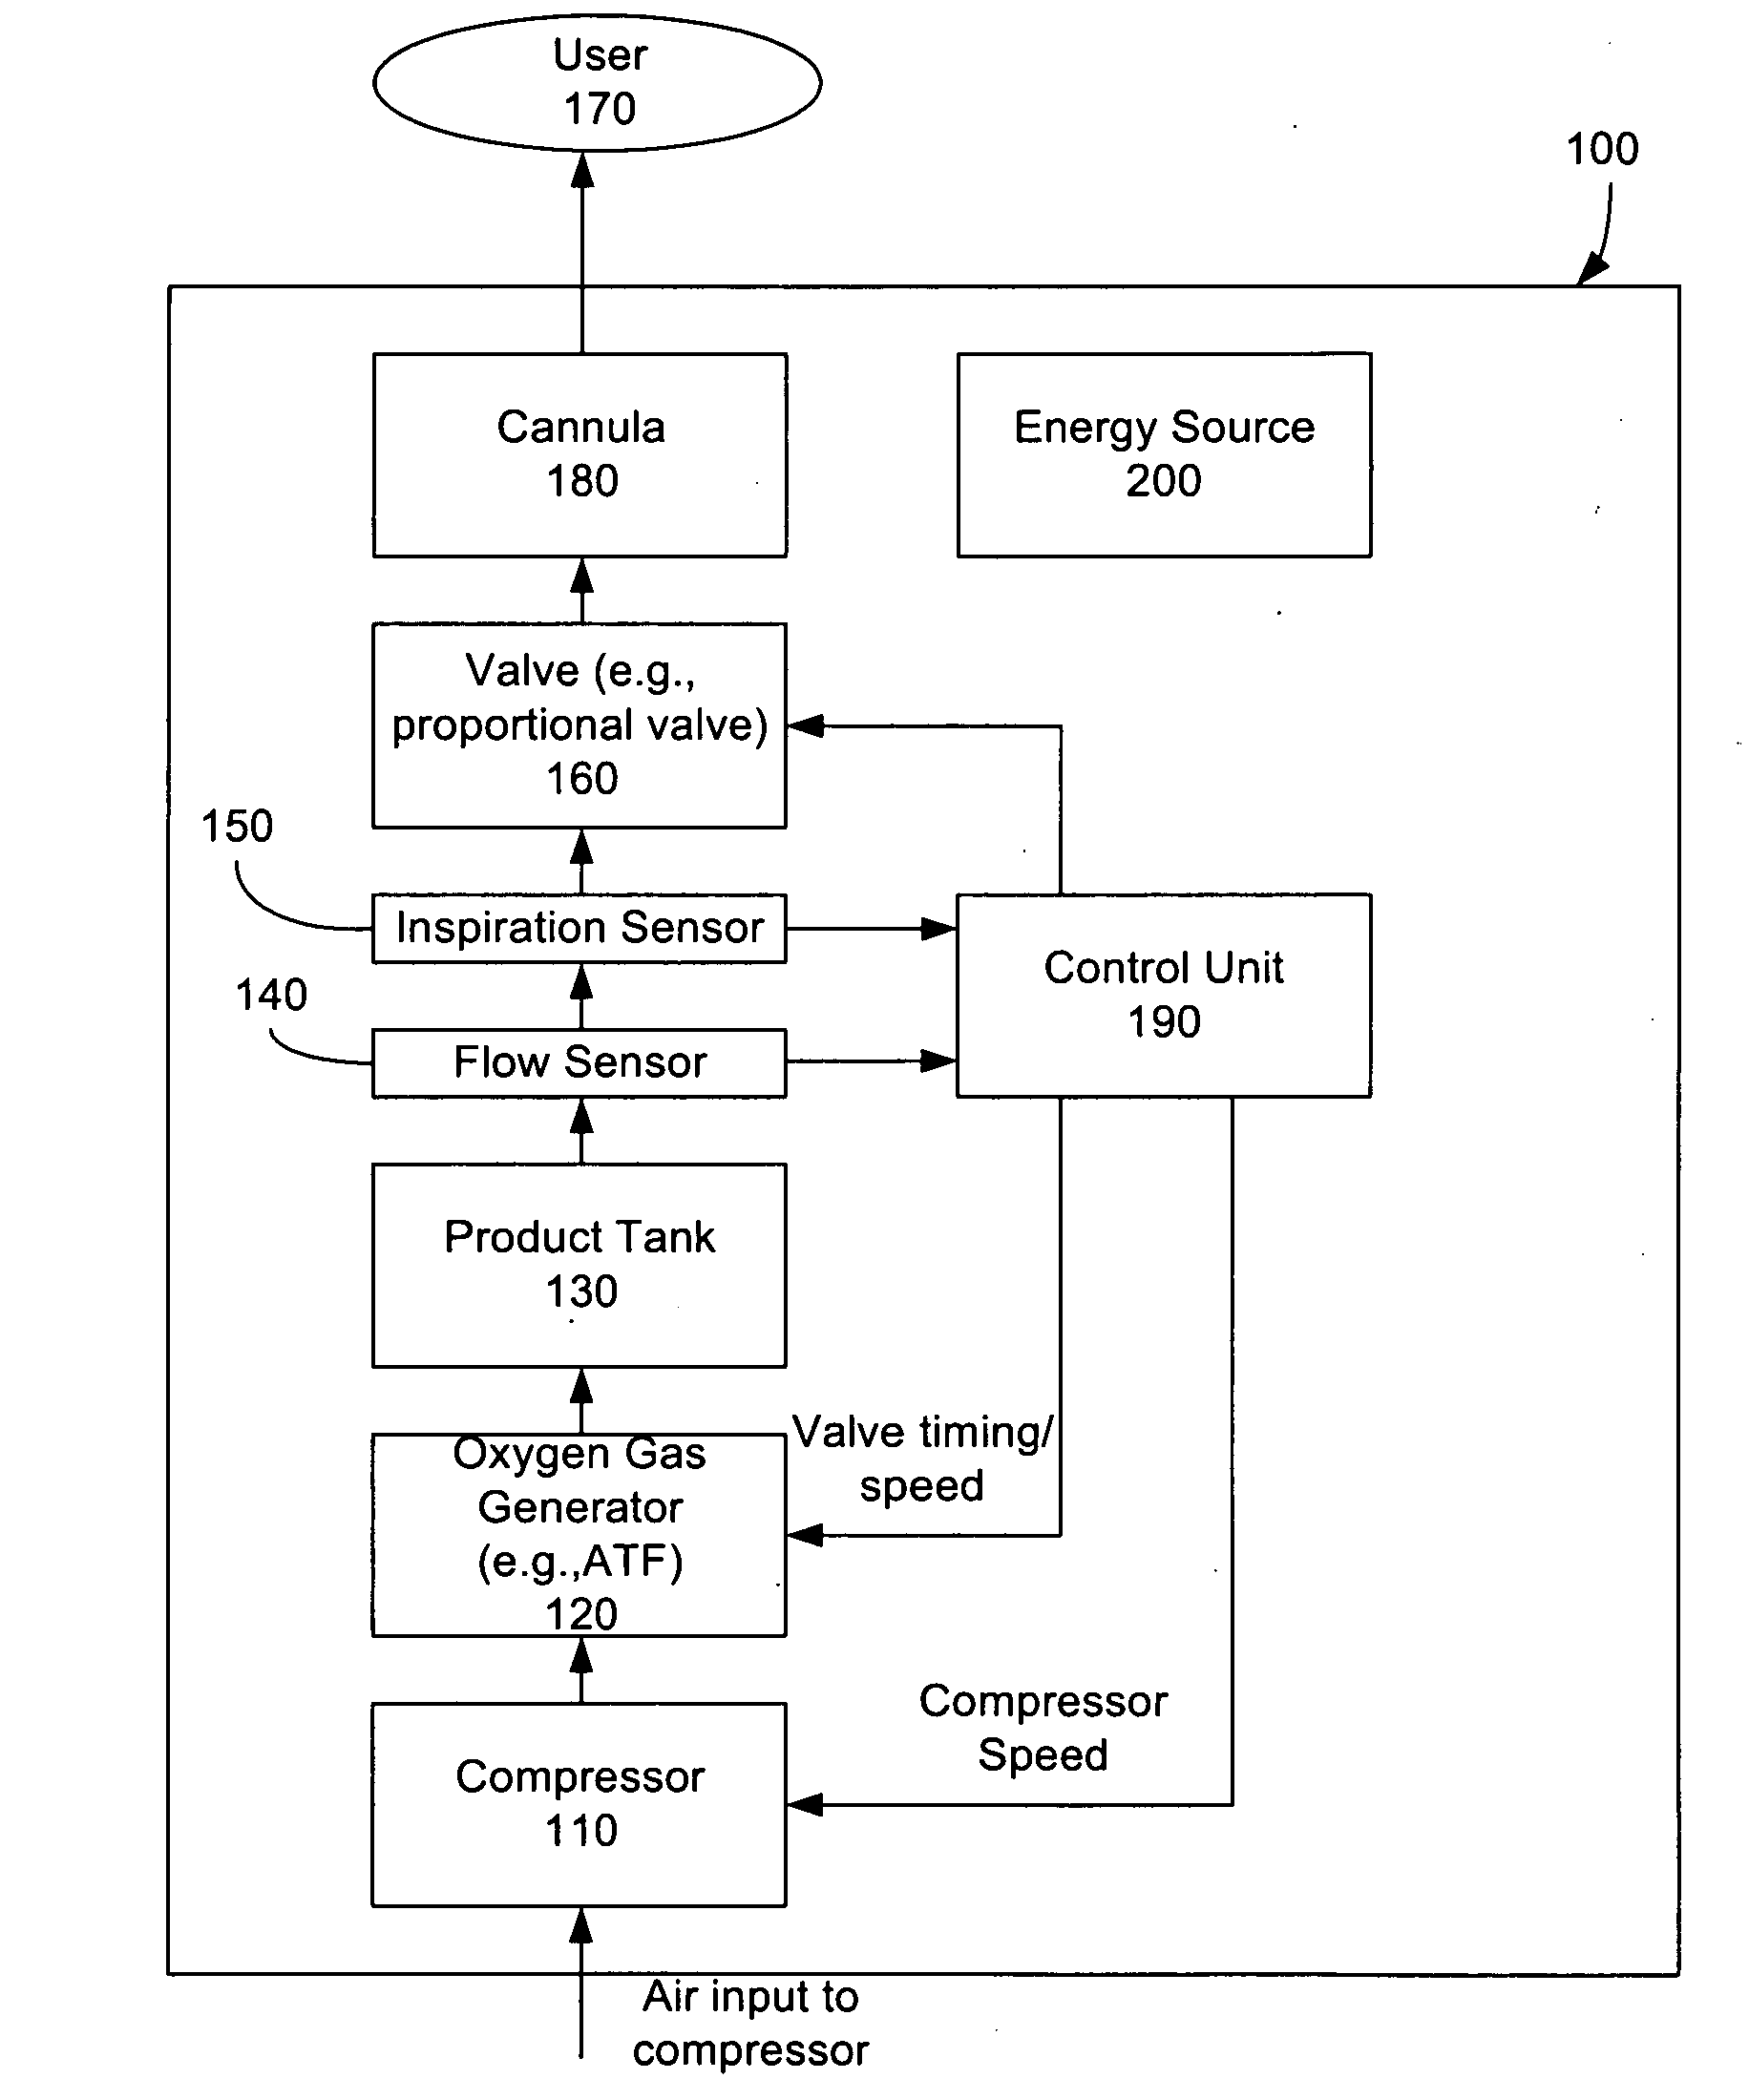 System and Method for Controlling Supply of Oxygen Based on Breathing Rate